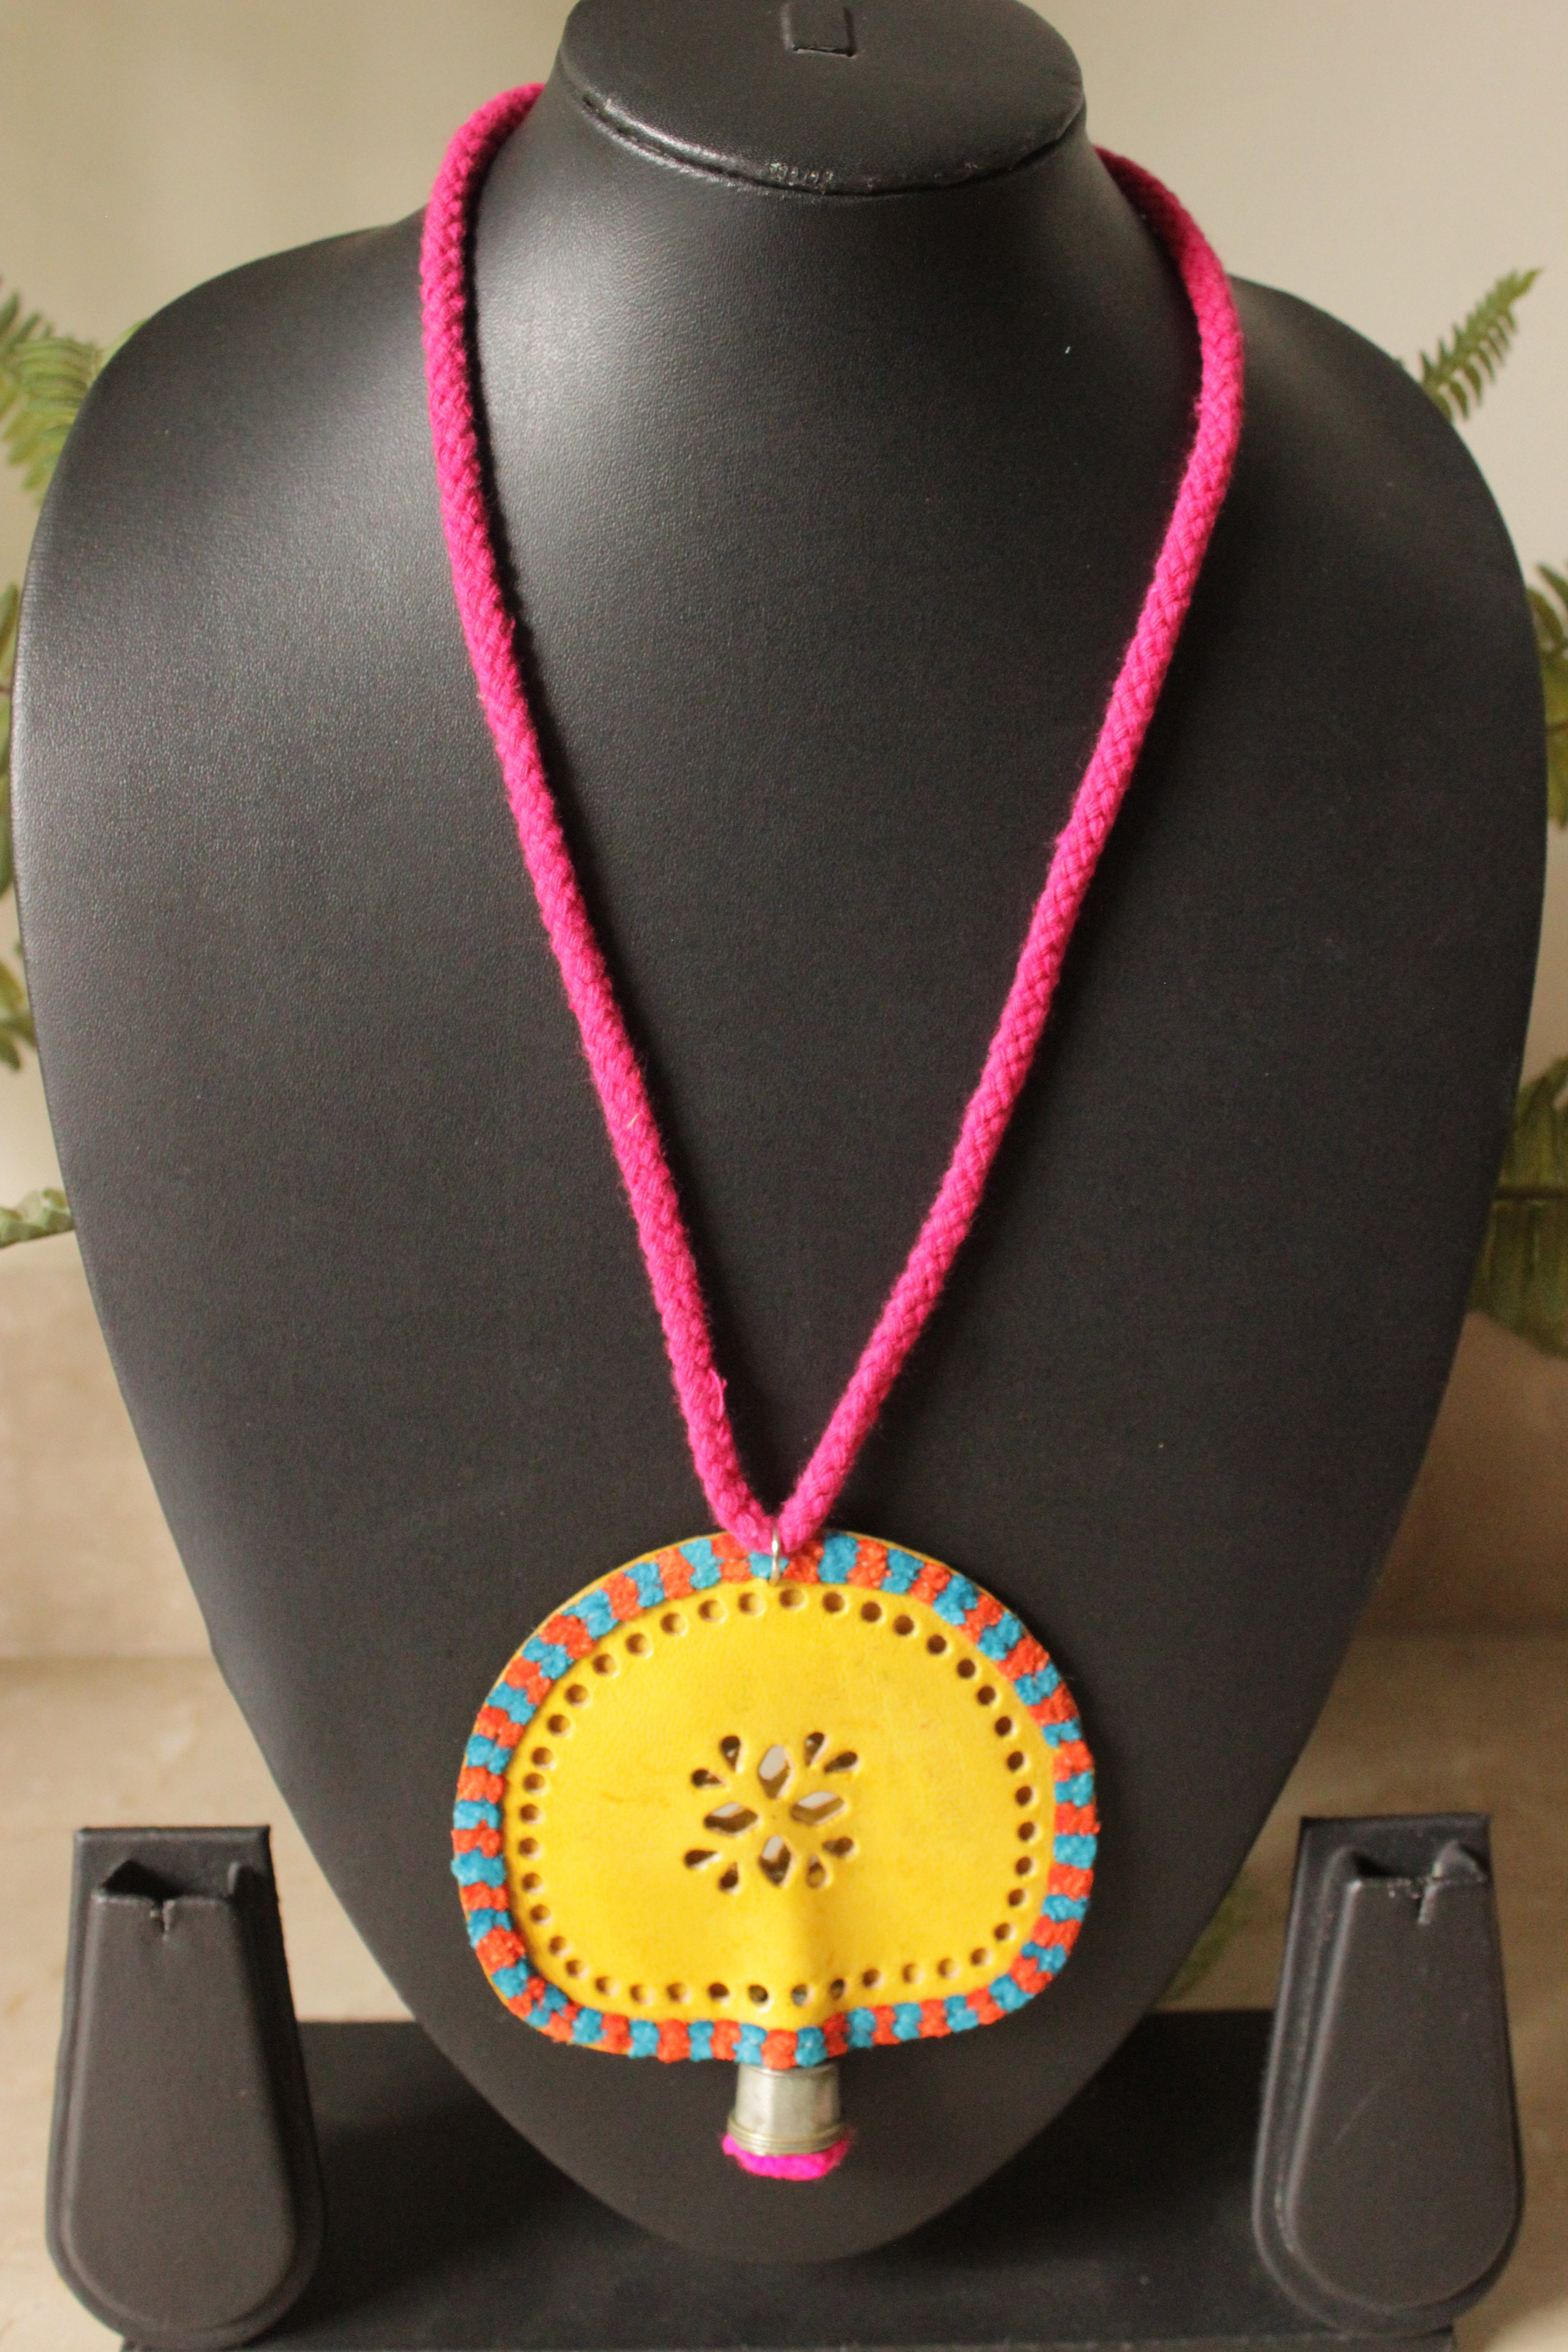 Hand Embroidered Yellow Leather Pendant Adjustable Closure Necklace